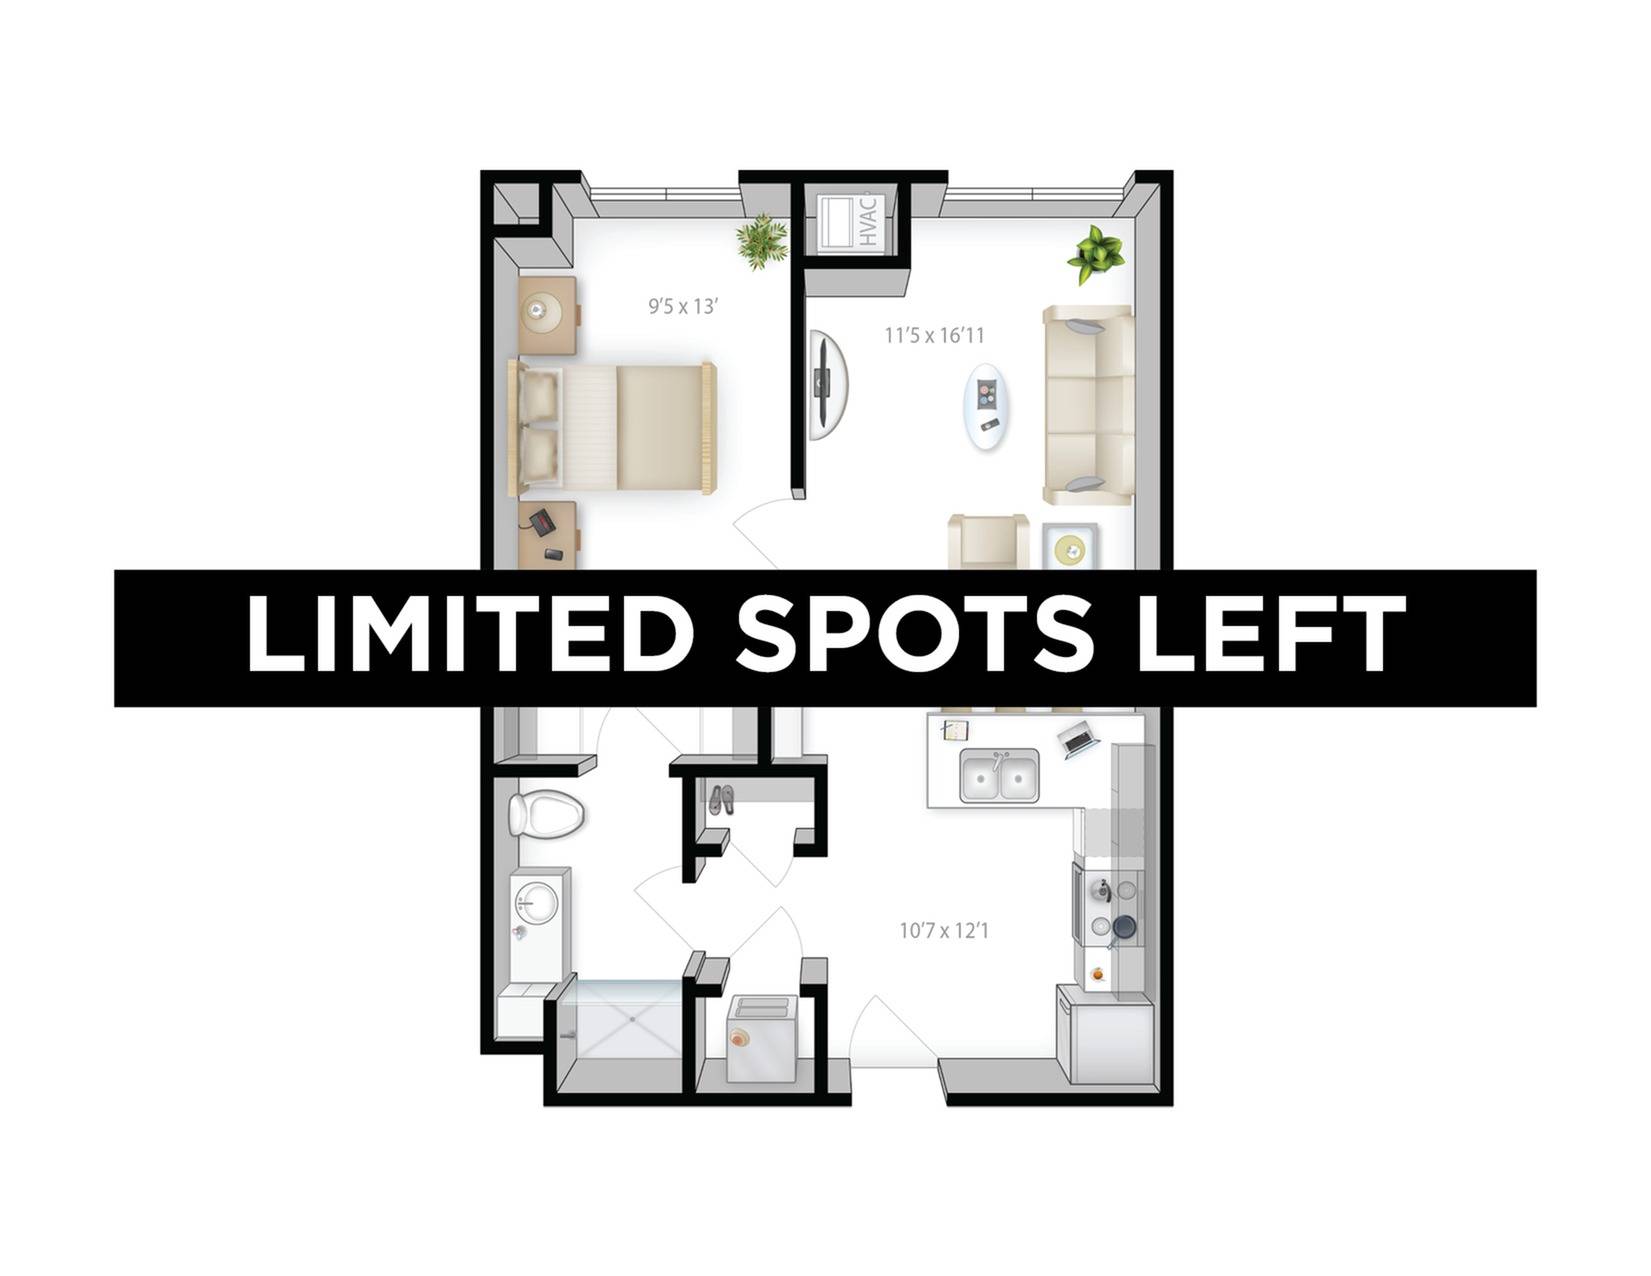 1BR/1BA - Tower 4